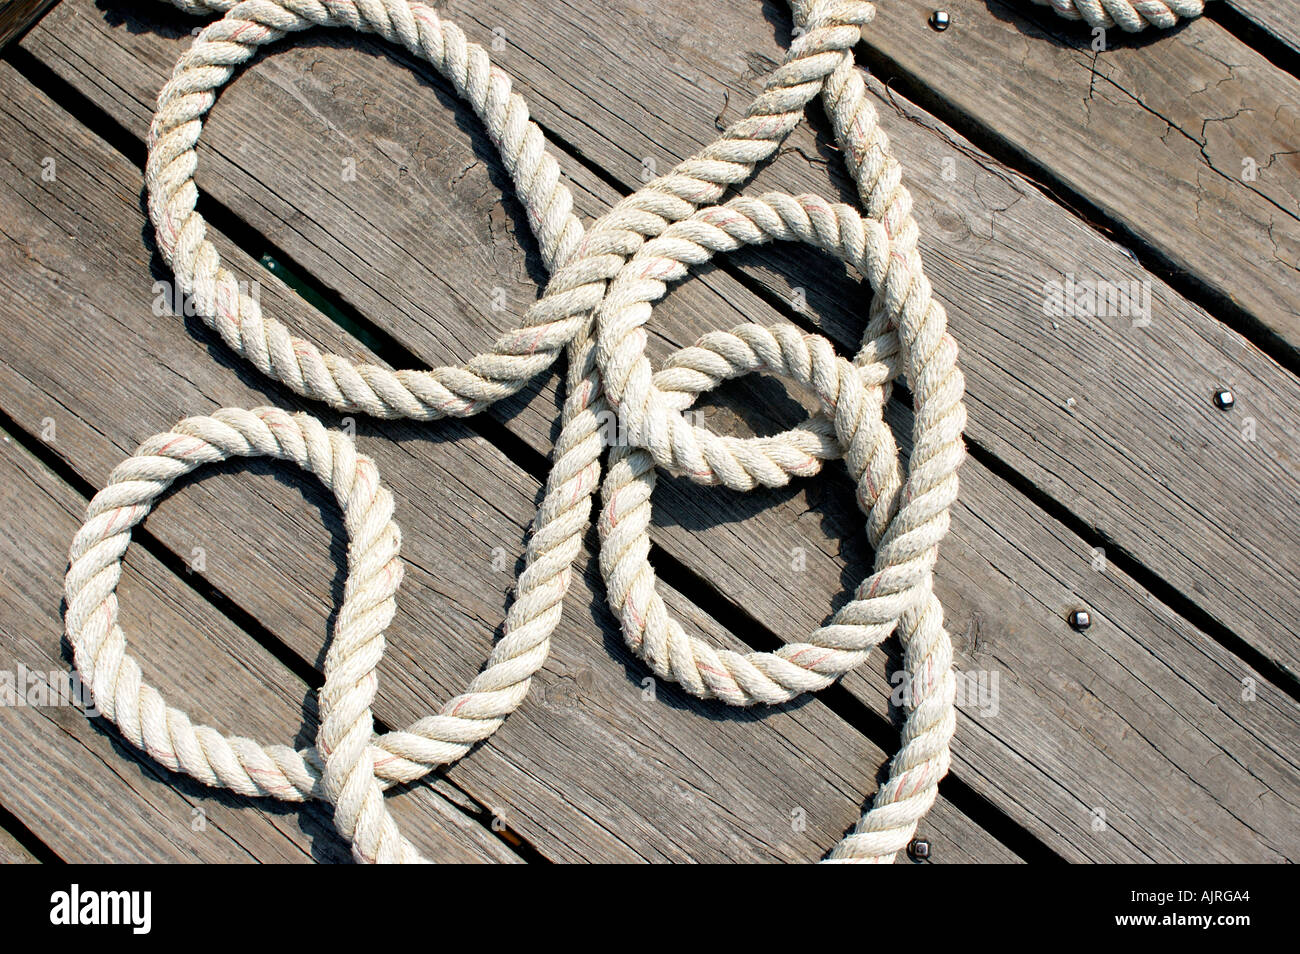 rope twine string braid braided rope twisted loose laying on the ground  deck dock wood lumber boat rope circles curves laying ar Stock Photo - Alamy